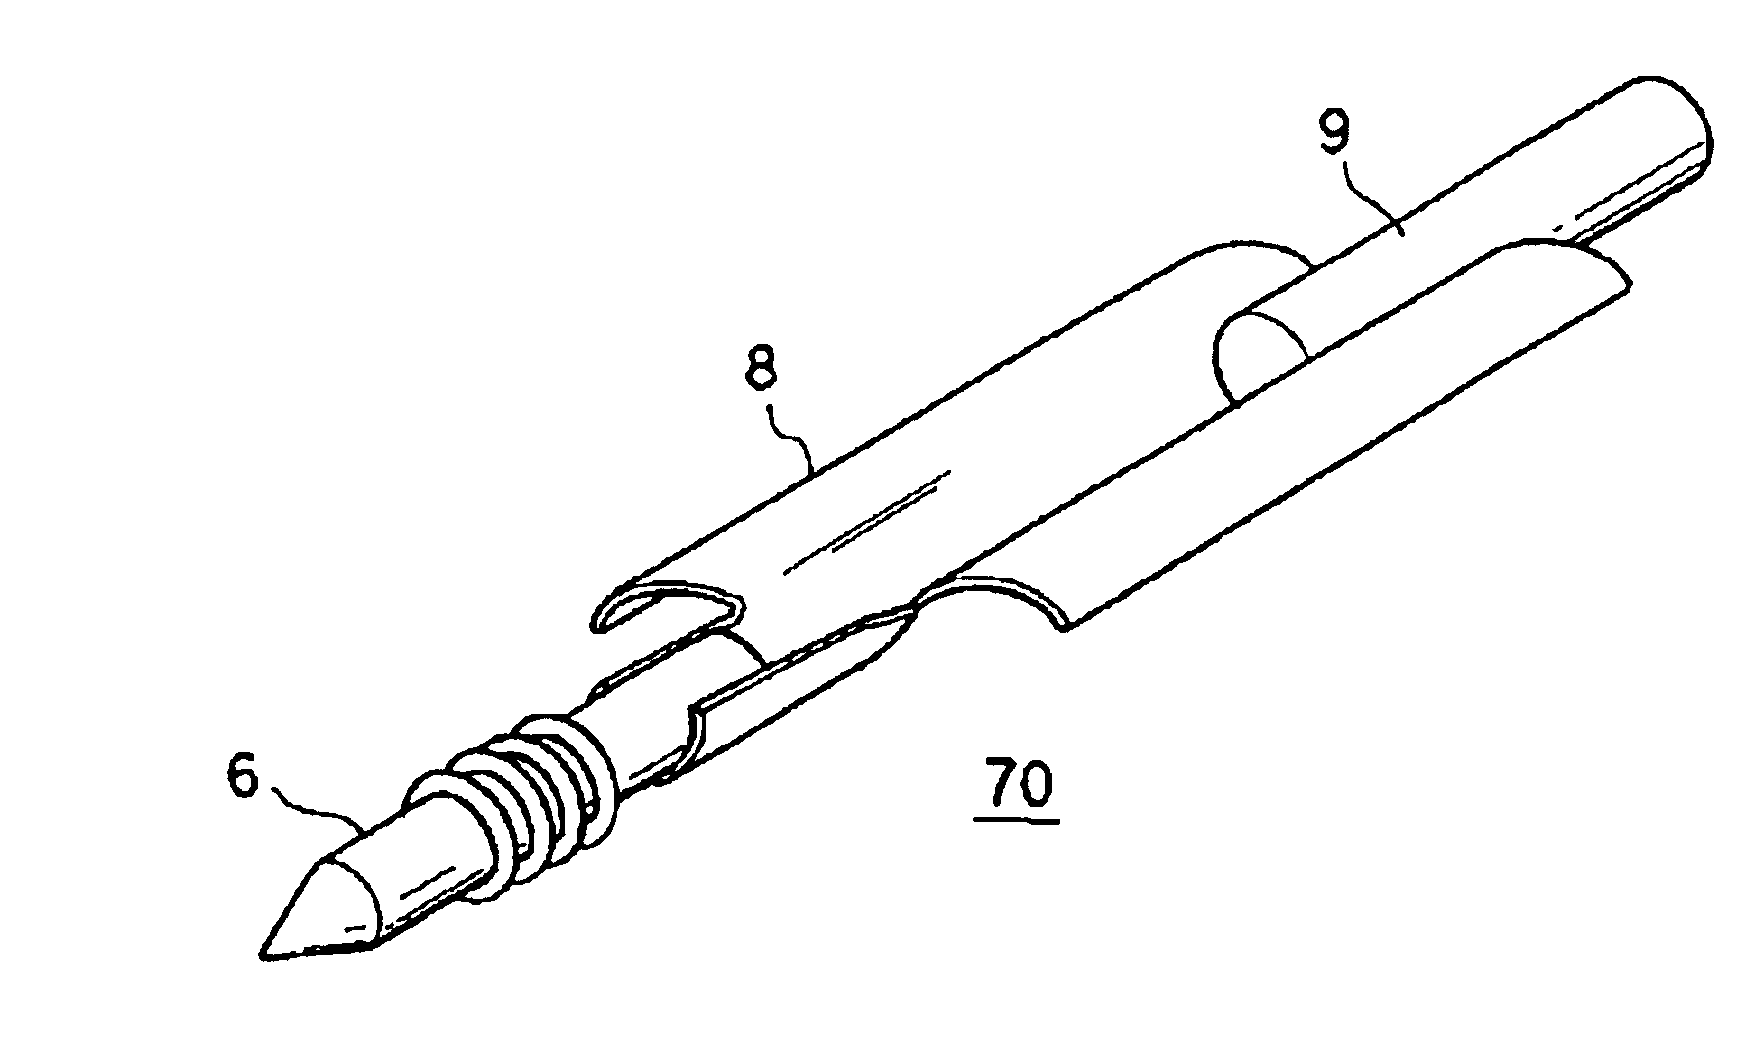 Ultrahigh pressure discharge lamp of the short arc type with improved metal foil to electrode connection arrangement